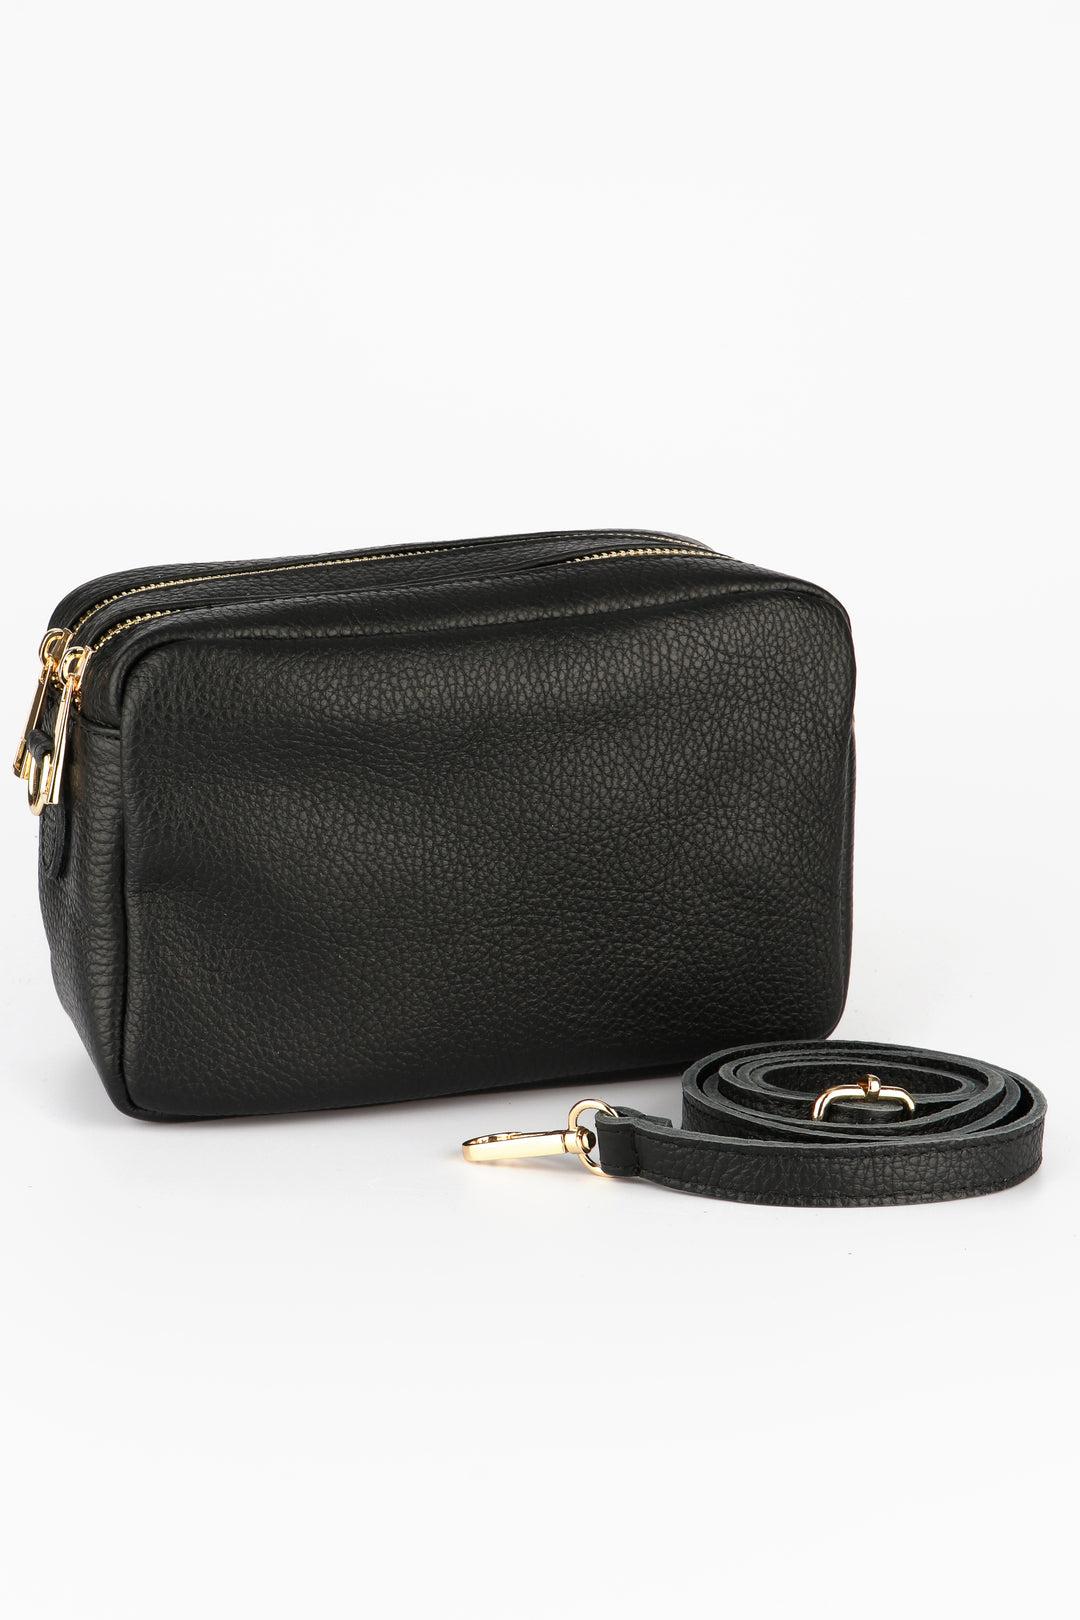 black leather crossbody camera bag with two zip closing compartments and a detachable bag strap